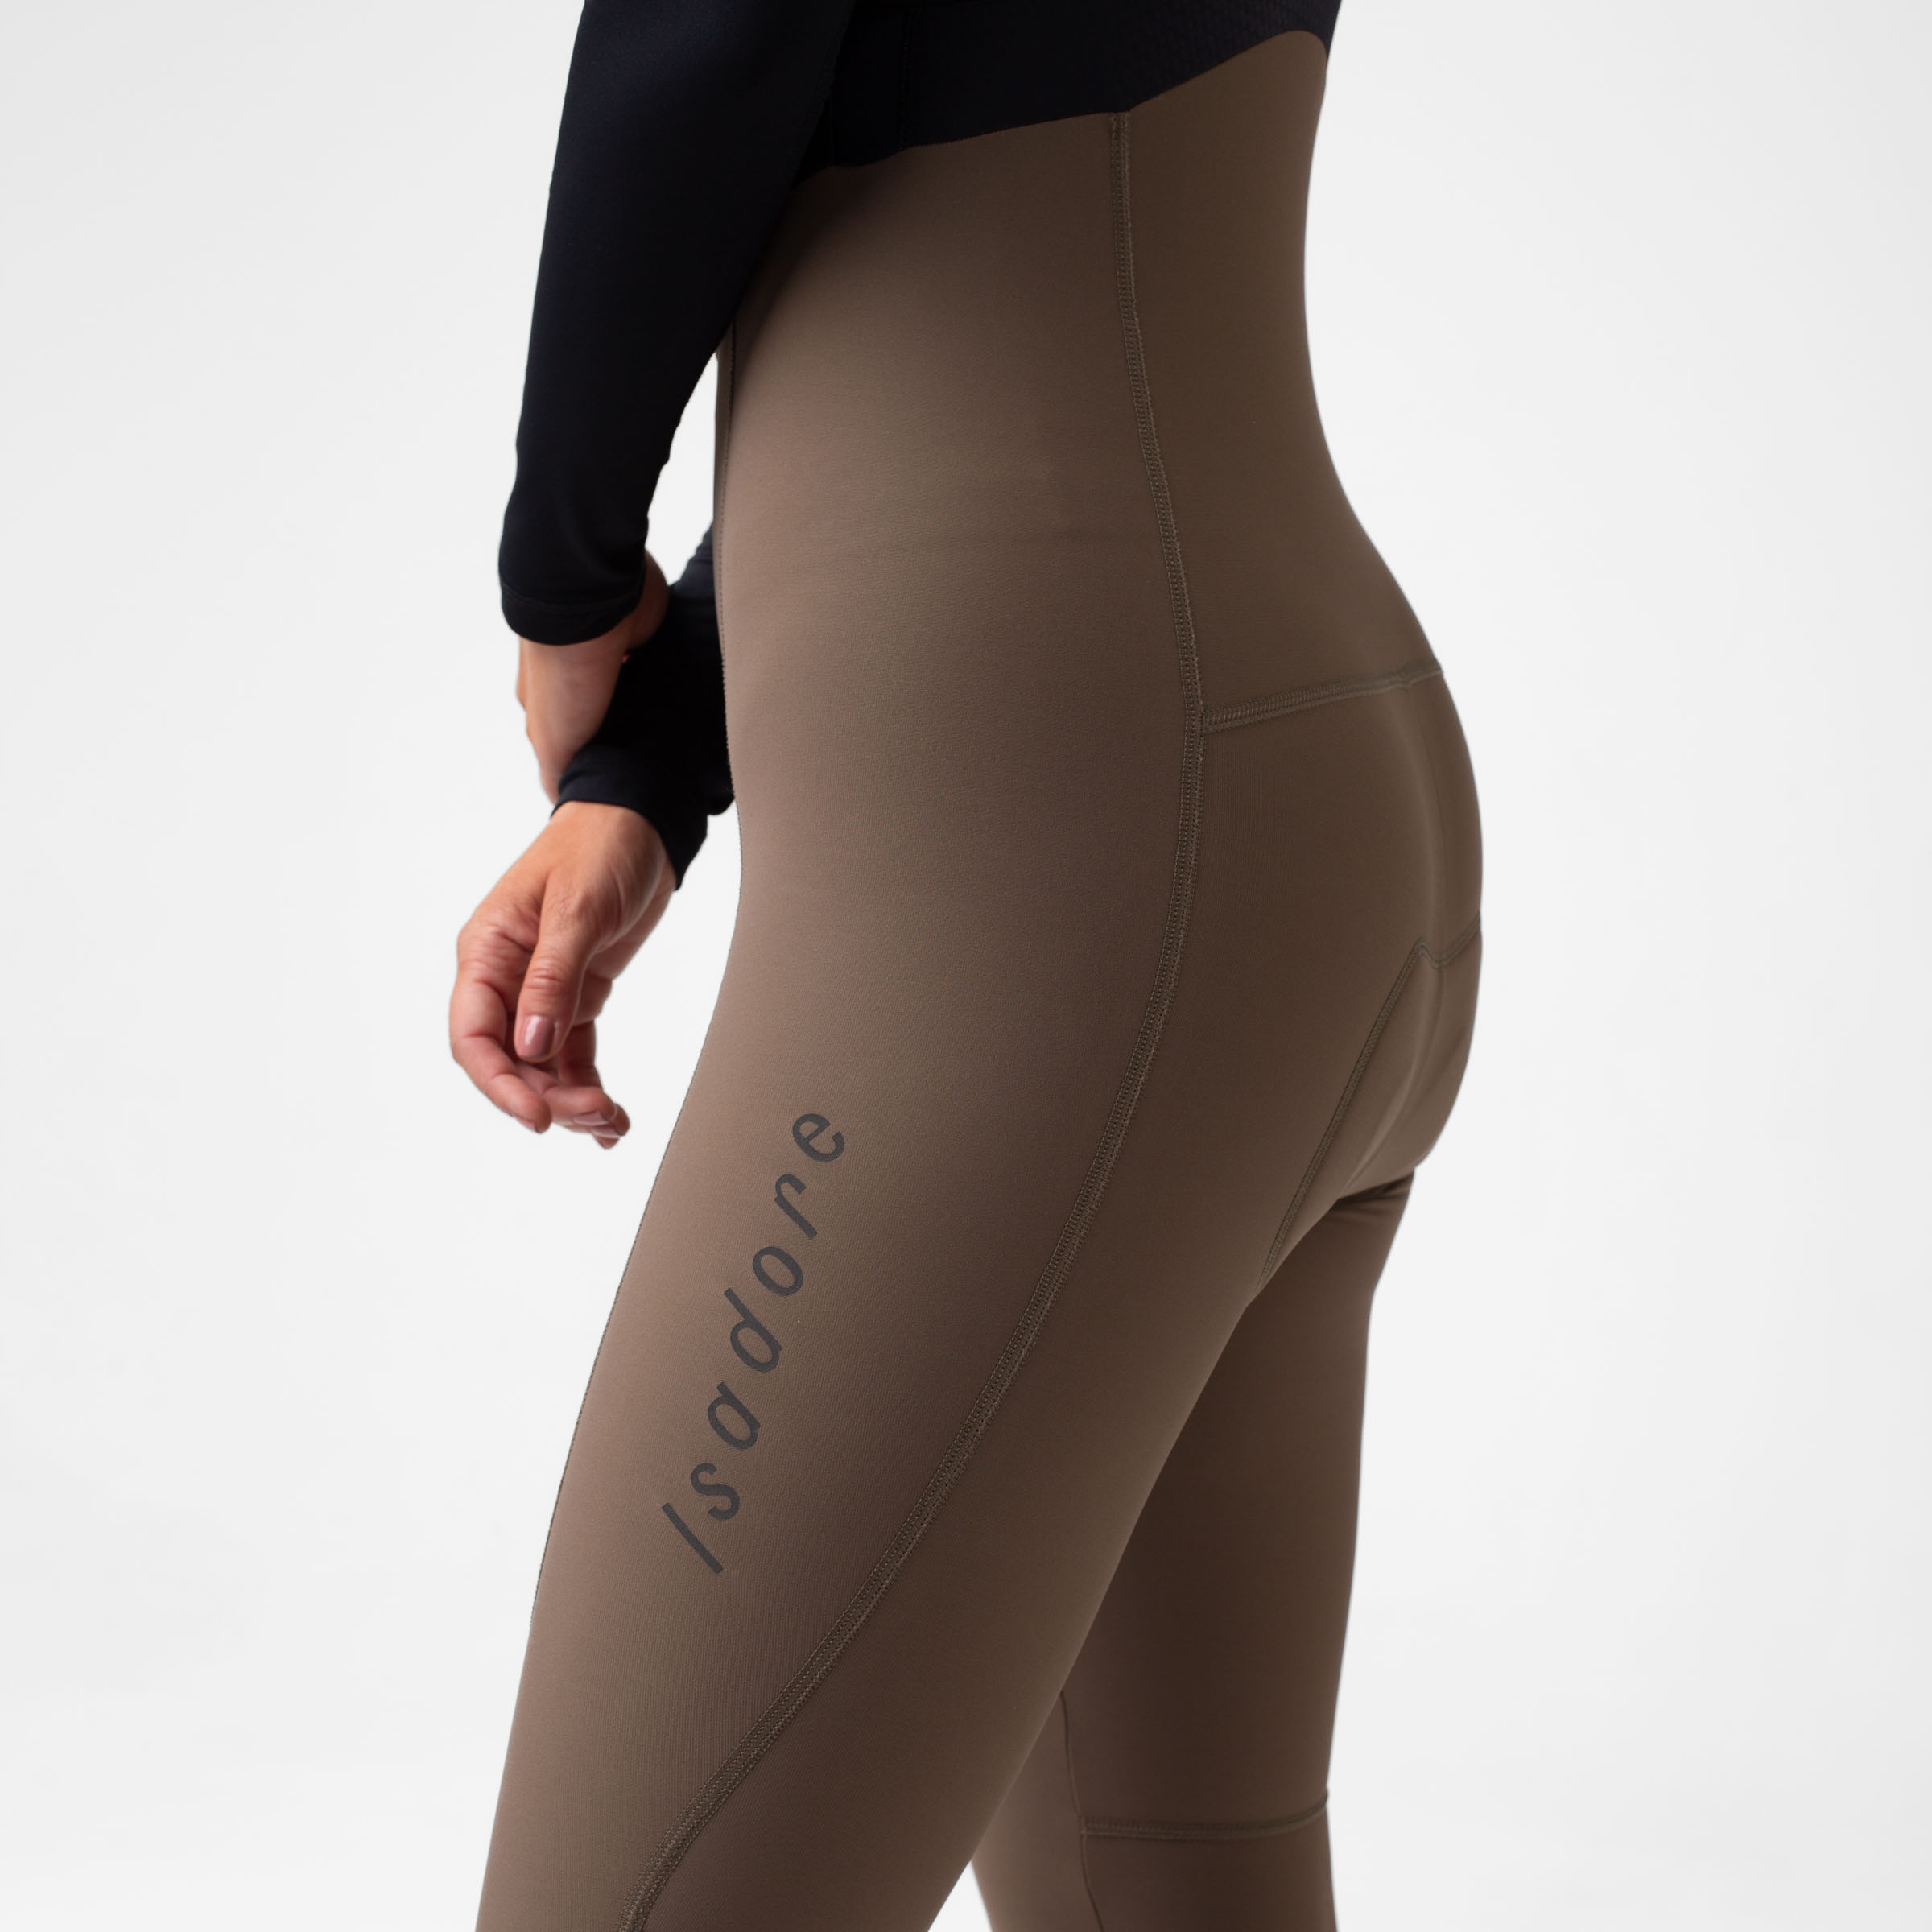 https://static.isadore.com/media/2023/09/9/9/women-s-signature-thermal-tights-morel-99861-w2400-h2400-flags1-v2.jpg